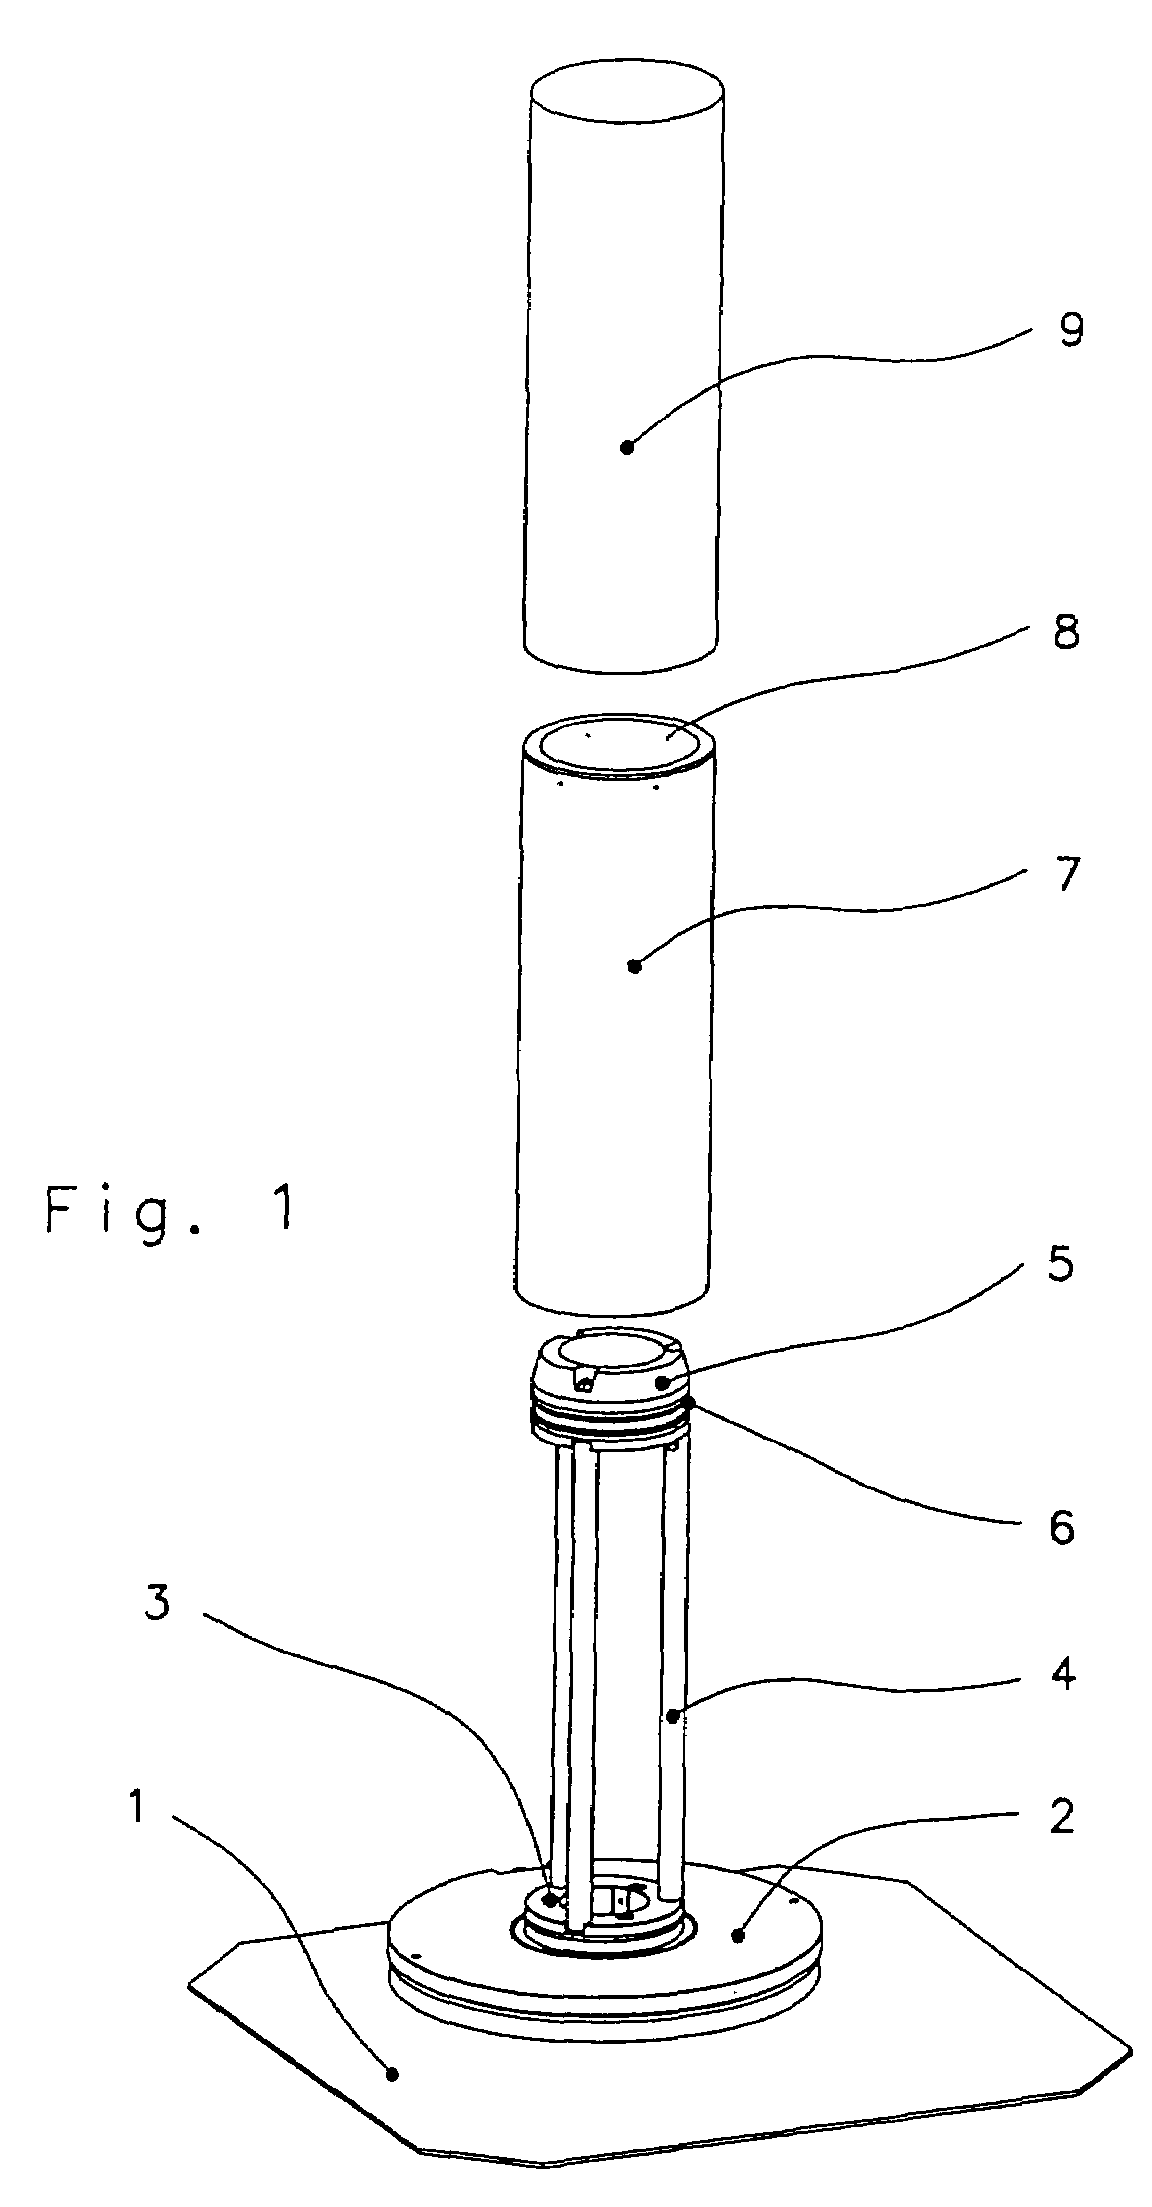 Apparatus and method for changing printing sleeves on a printing machine